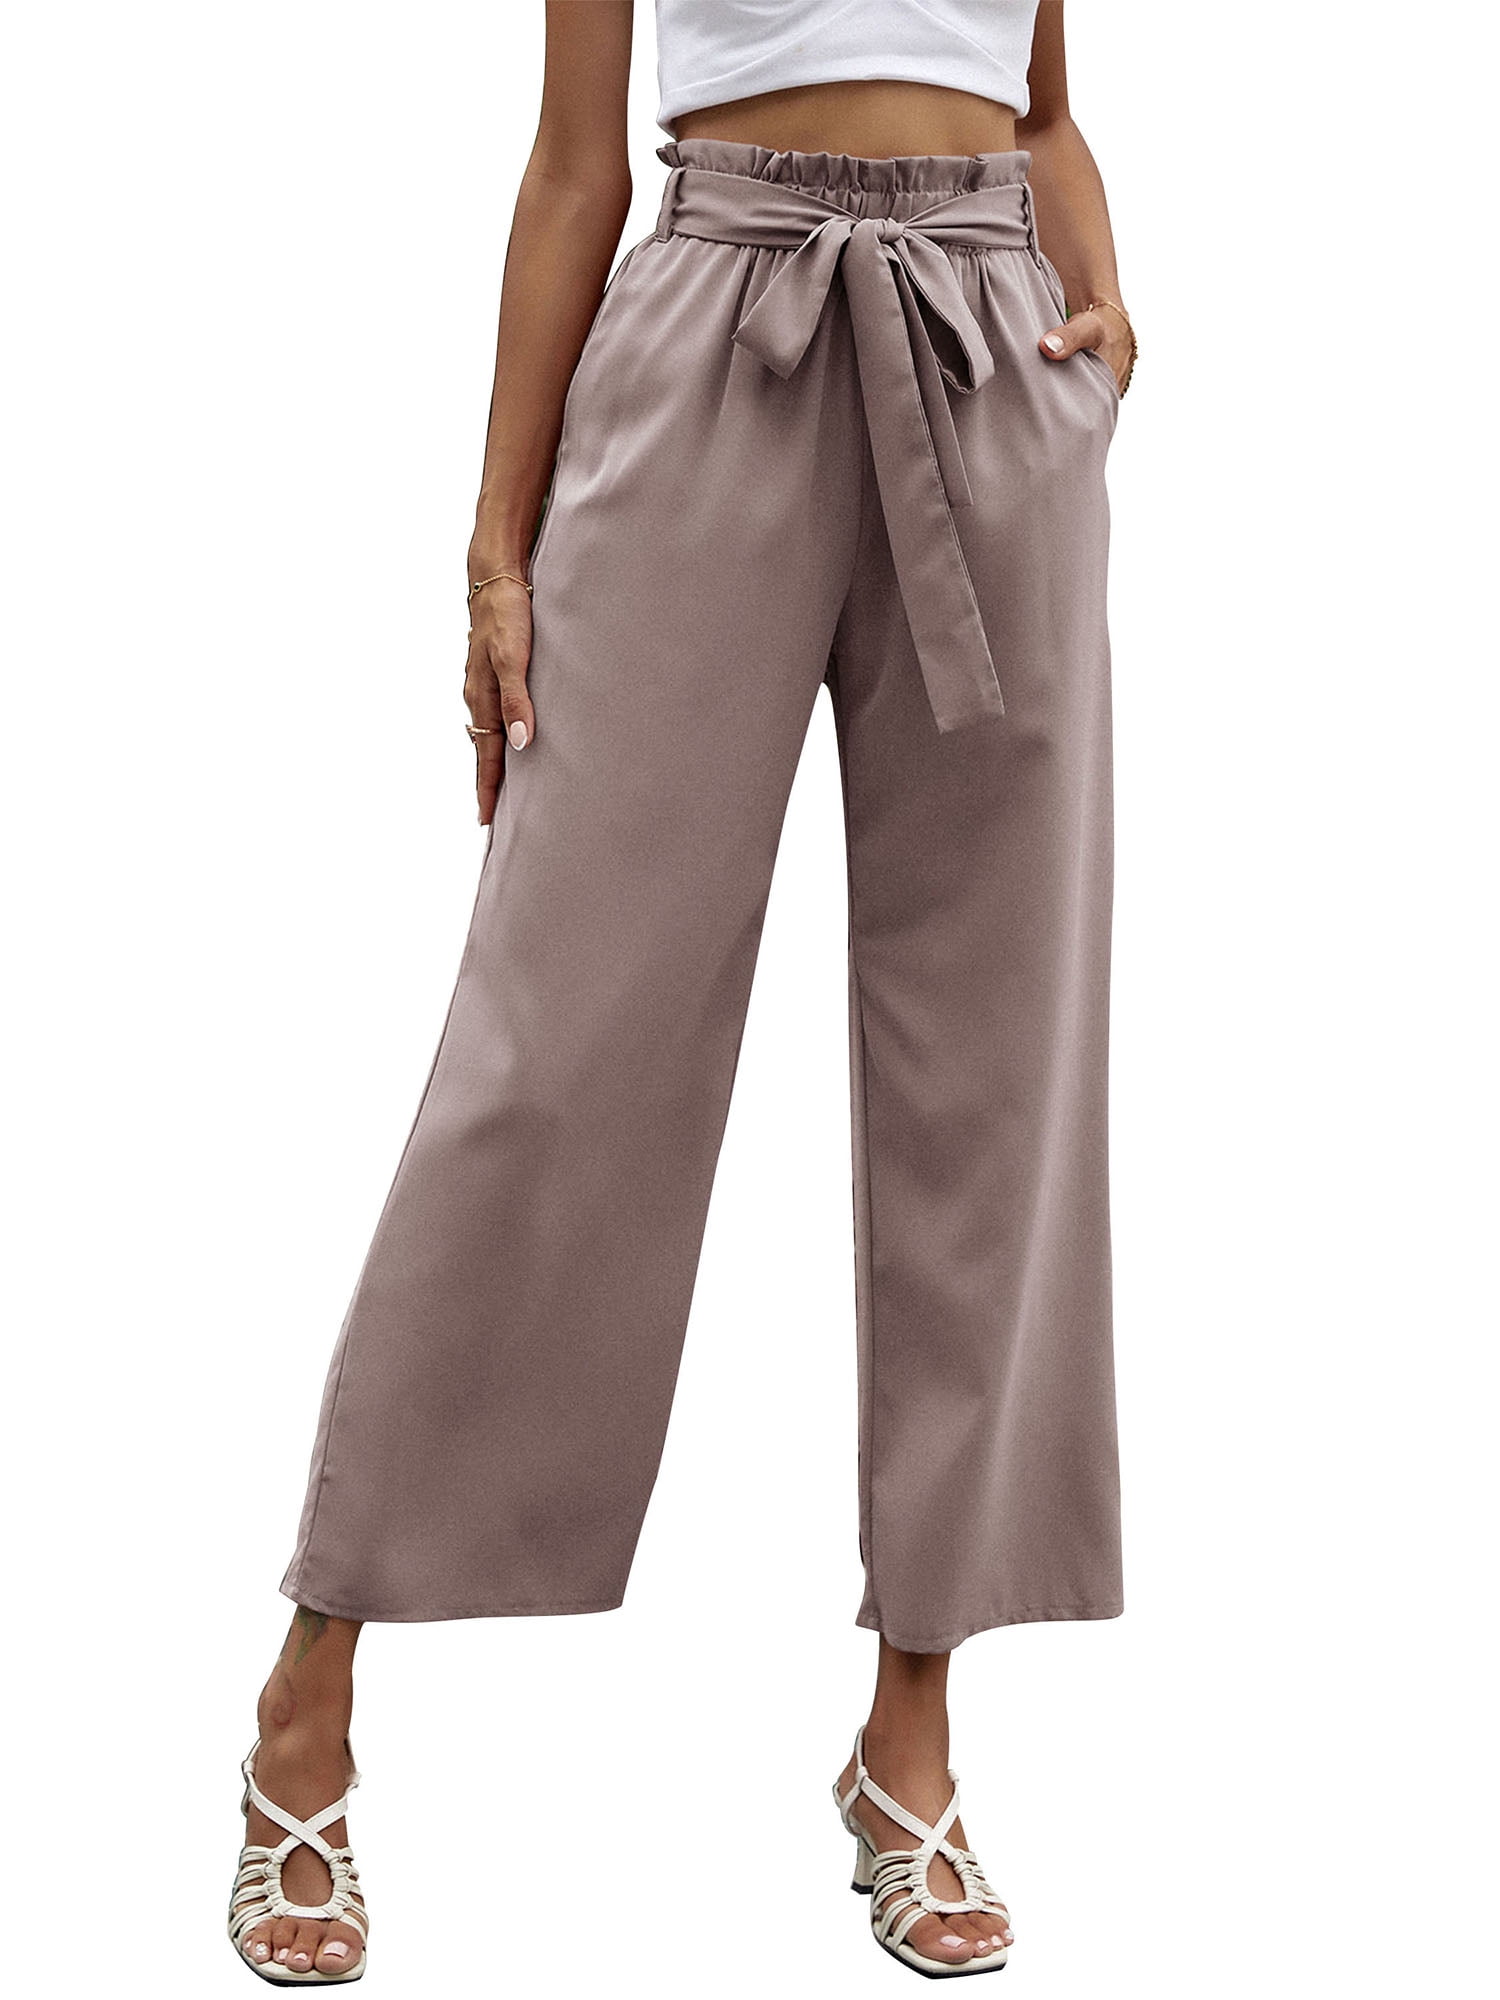 Women Palazzo Pants Trousers Dressy Gray Floral Wide Leg Relaxed Comfy Casual 